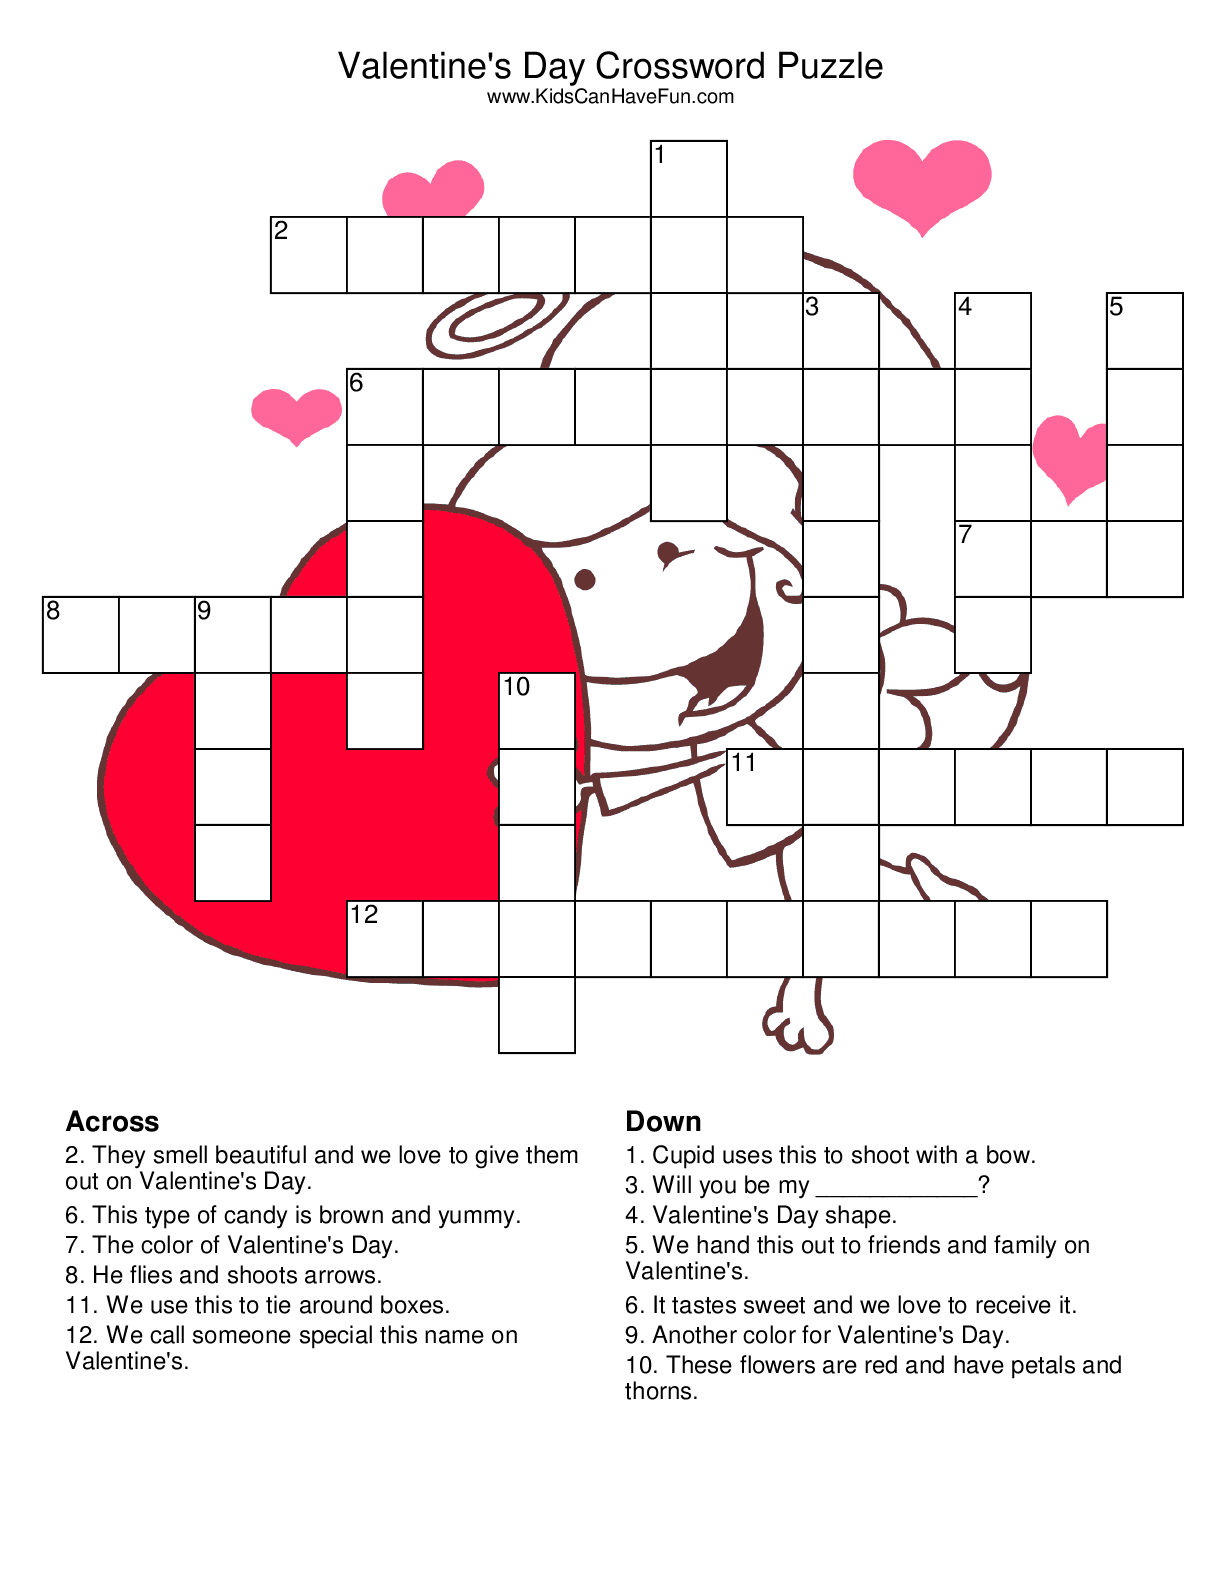 What A Great Way To Spend The Night With Your Love Then Being Smart - Printable Valentine Crossword Puzzle